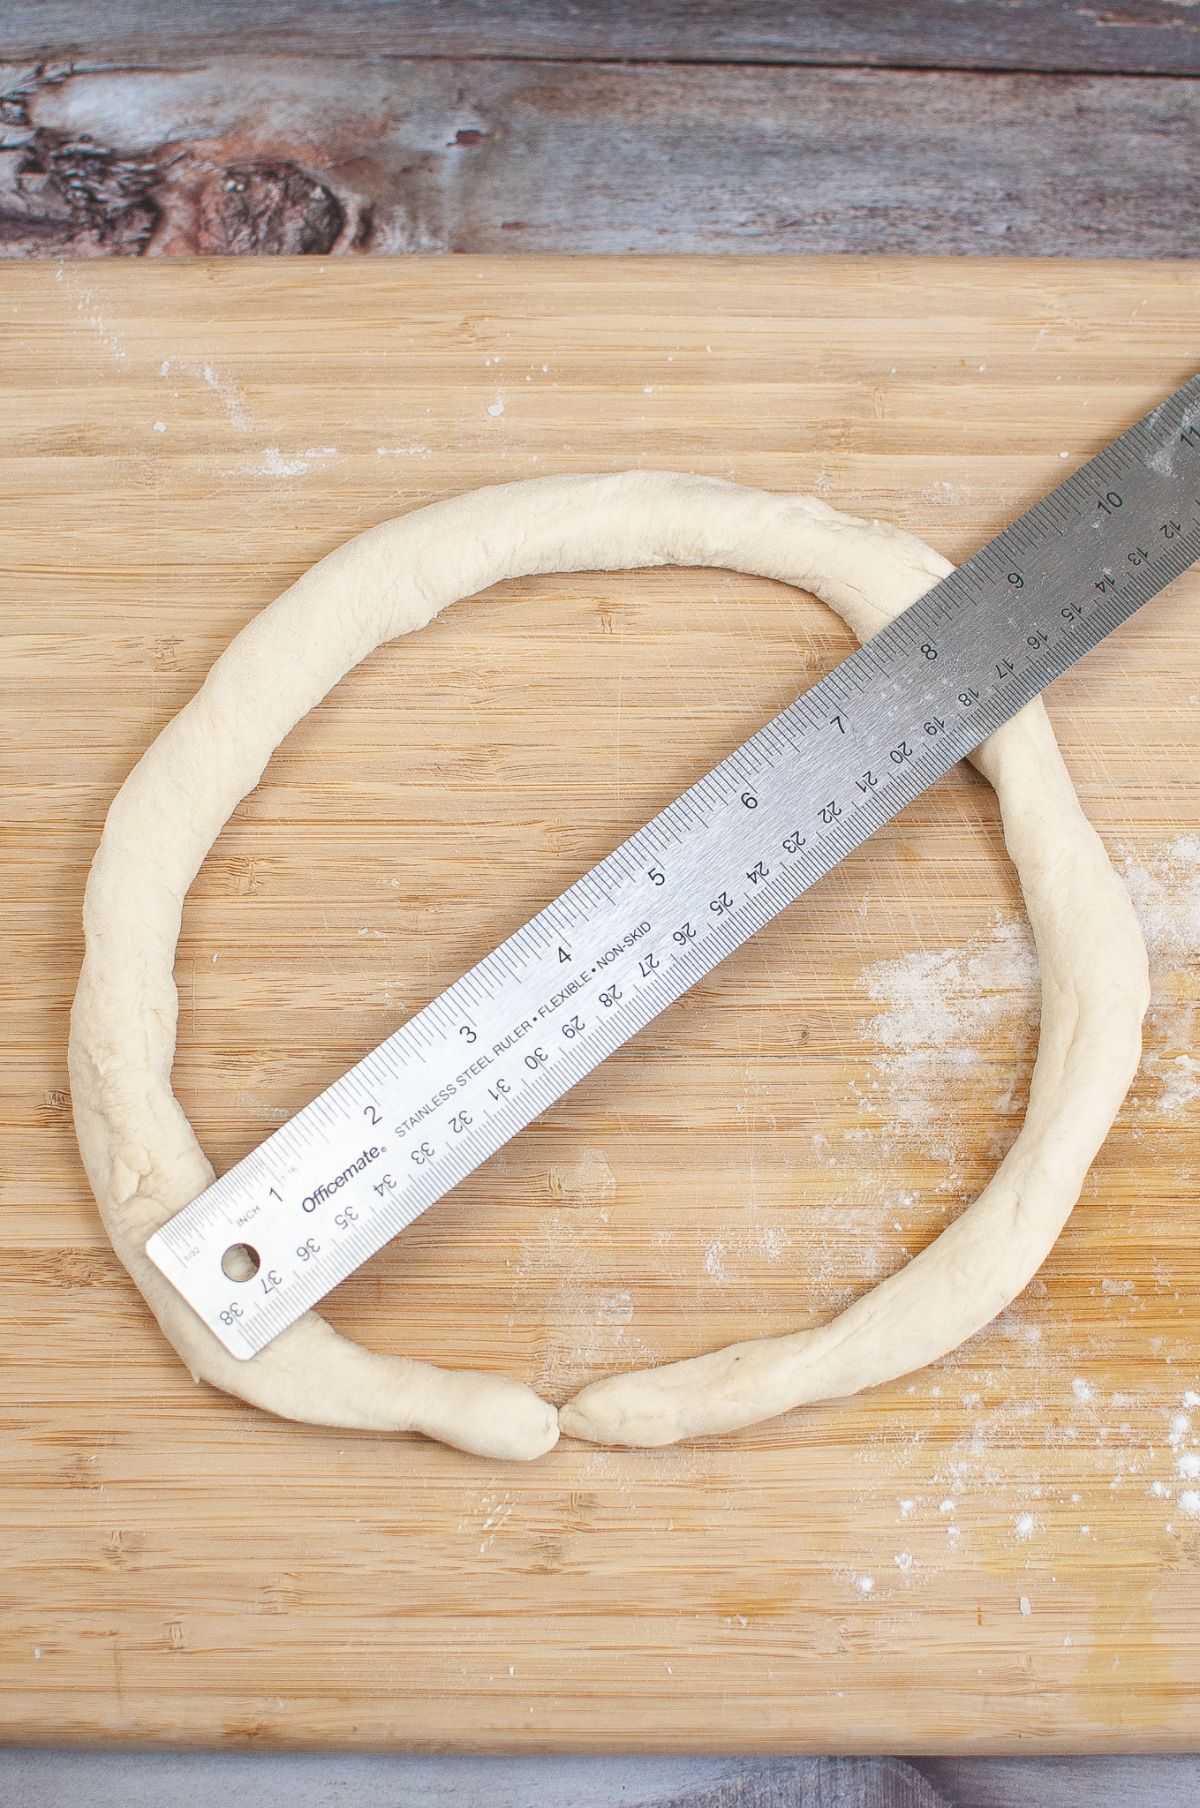 Rolled dough on a wooden chopping board with measuring ruler.